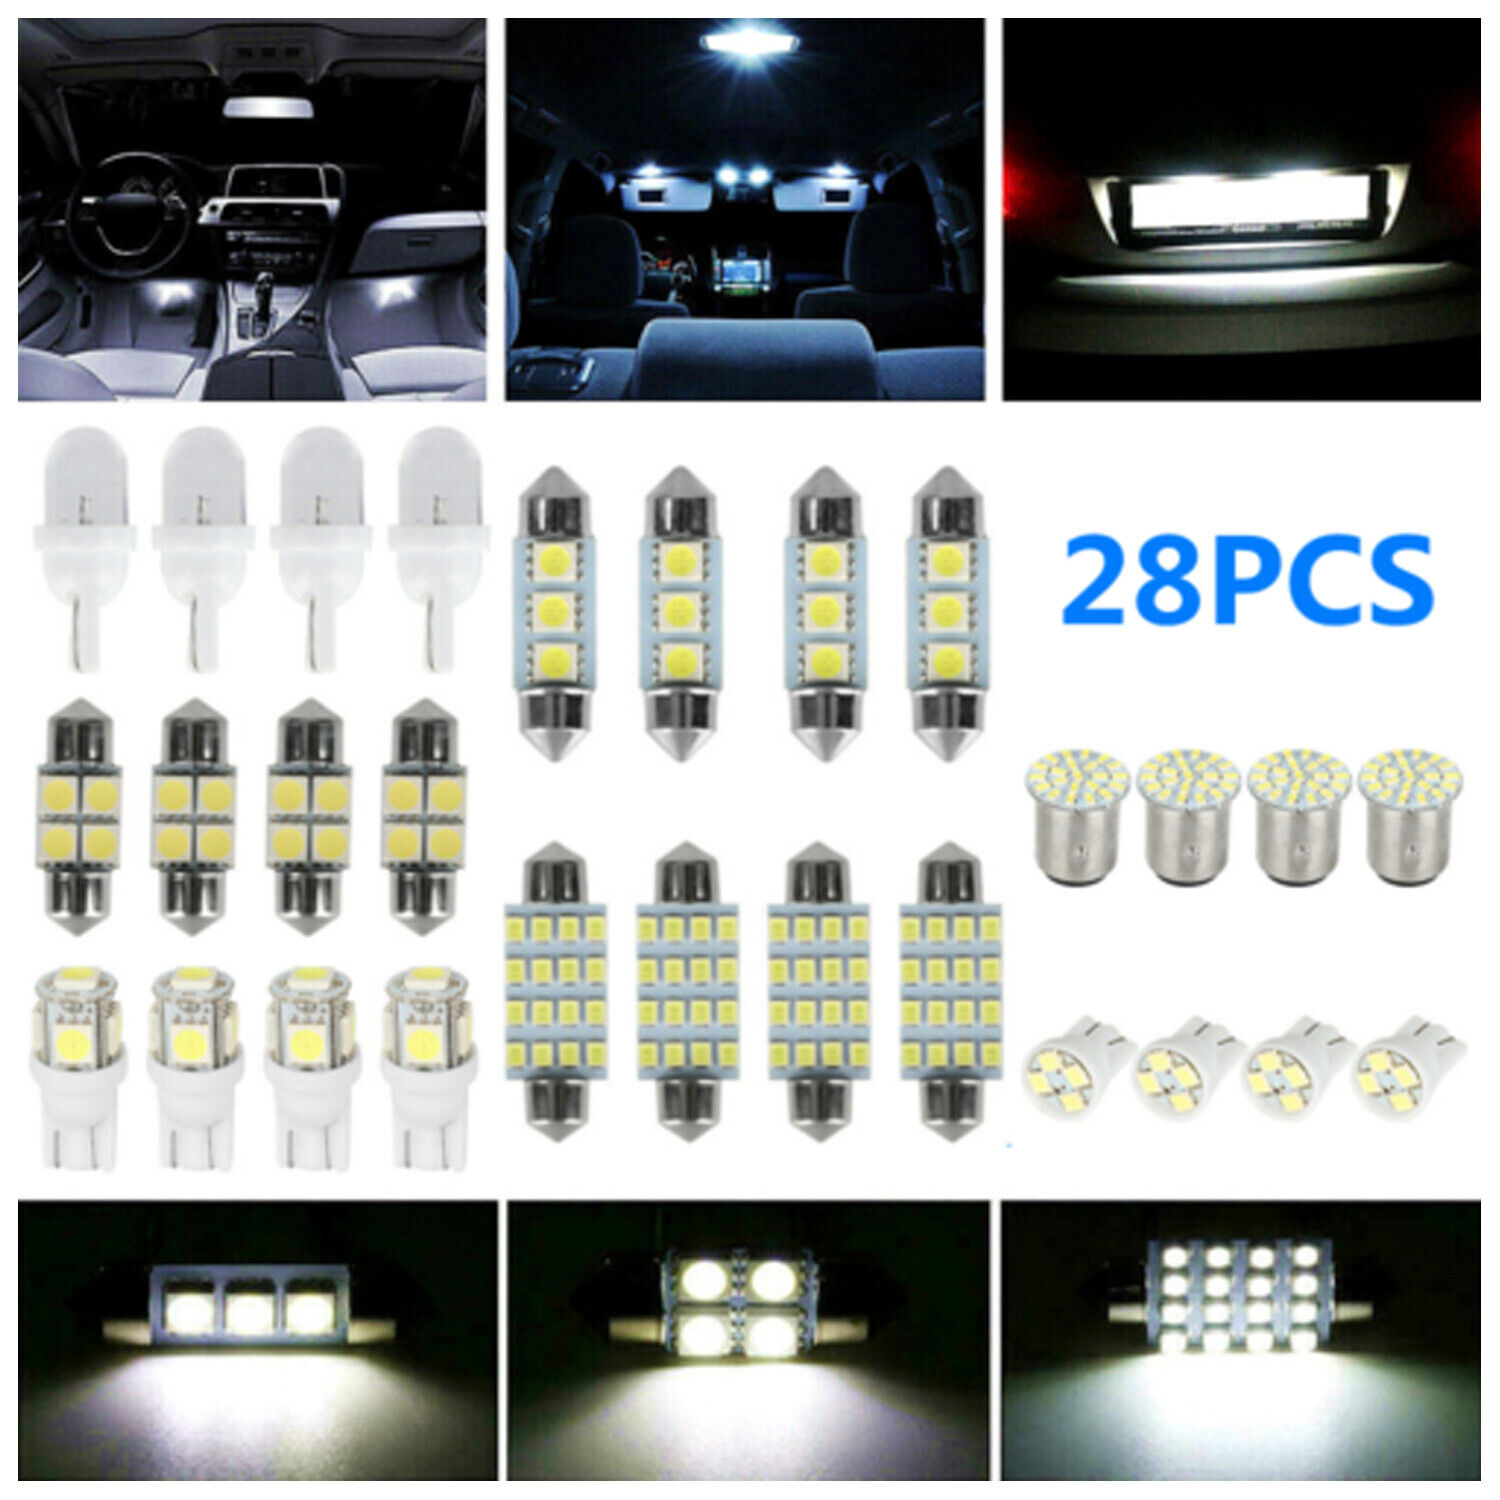 28Pcs LED Car Interior White Combo Map Dome Door Trunk License Plate Light Bulbs